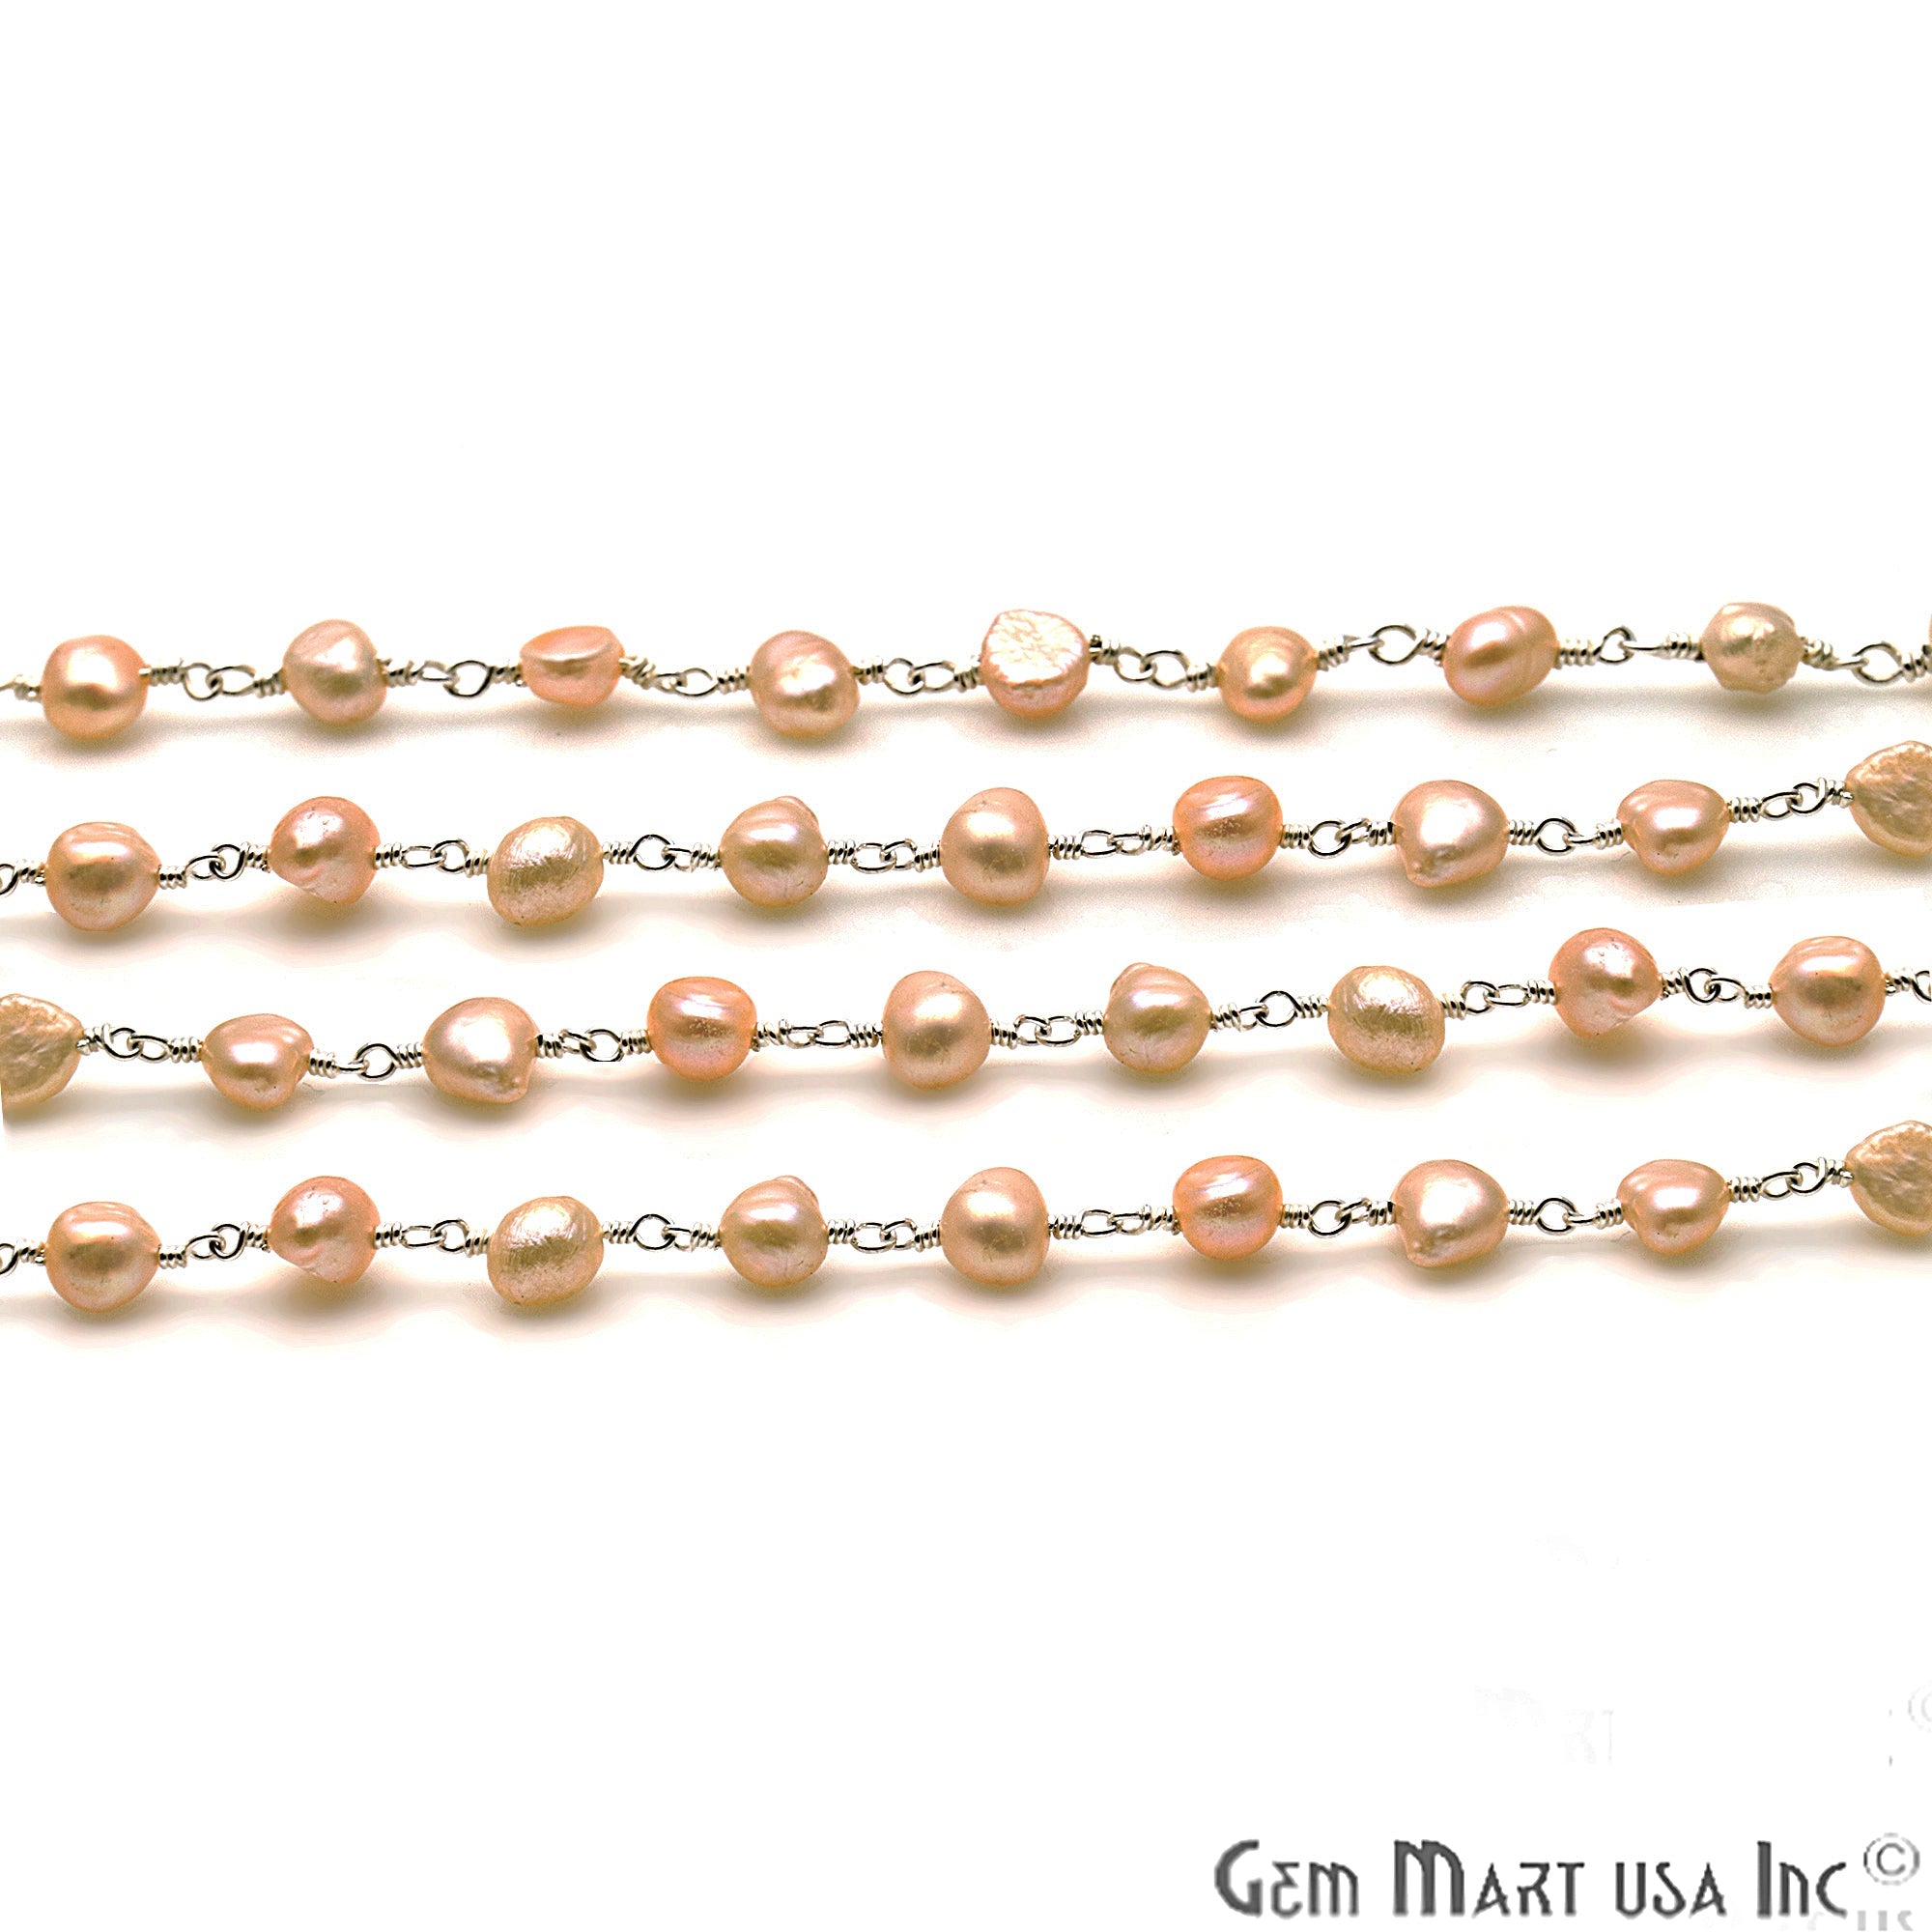 Pink Freshwater Pearl Nugget Beads 10-15mm Silver Plated Wire Wrapped Rosary Chain - GemMartUSA